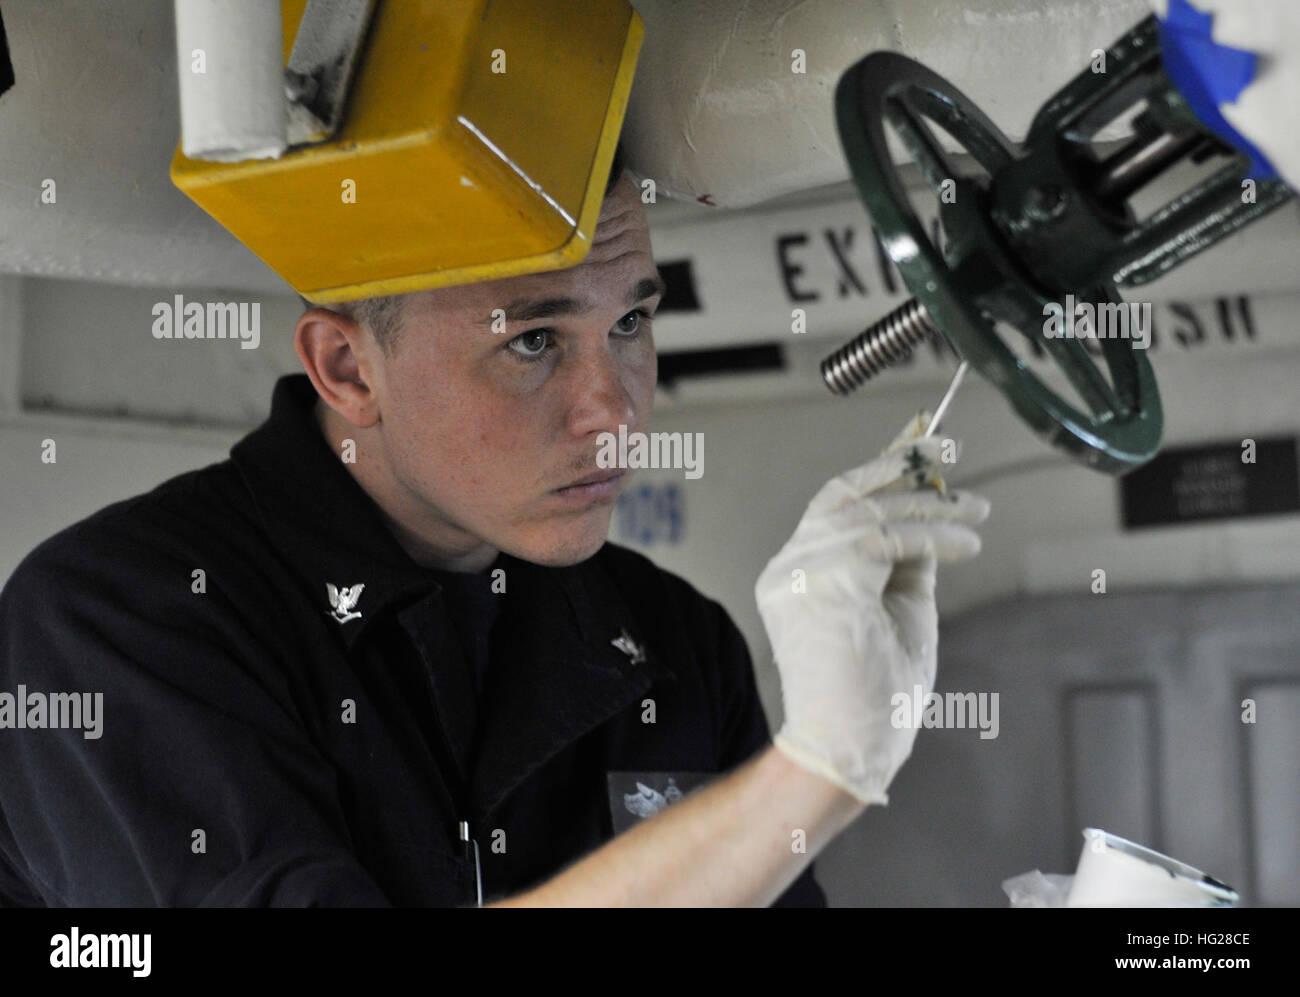 150626-N-LG619-011 PHILIPPINE SEA (June 26, 2015) - Personnel Specialist 3rd Class Samuel Welch, attached to U.S. the 7th Fleet flagship USS Blue Ridge (LCC 19), paints a salt water hand valve. Blue Ridge is patrolling within the U.S. 7th Fleet area of operations after completing a brief maintenance period. (U.S. Navy photo by Mass Communication Specialist 1st Class Mike Story/ RELEASED) USS Blue Ridge operations 150626-N-LG619-011 Stock Photo